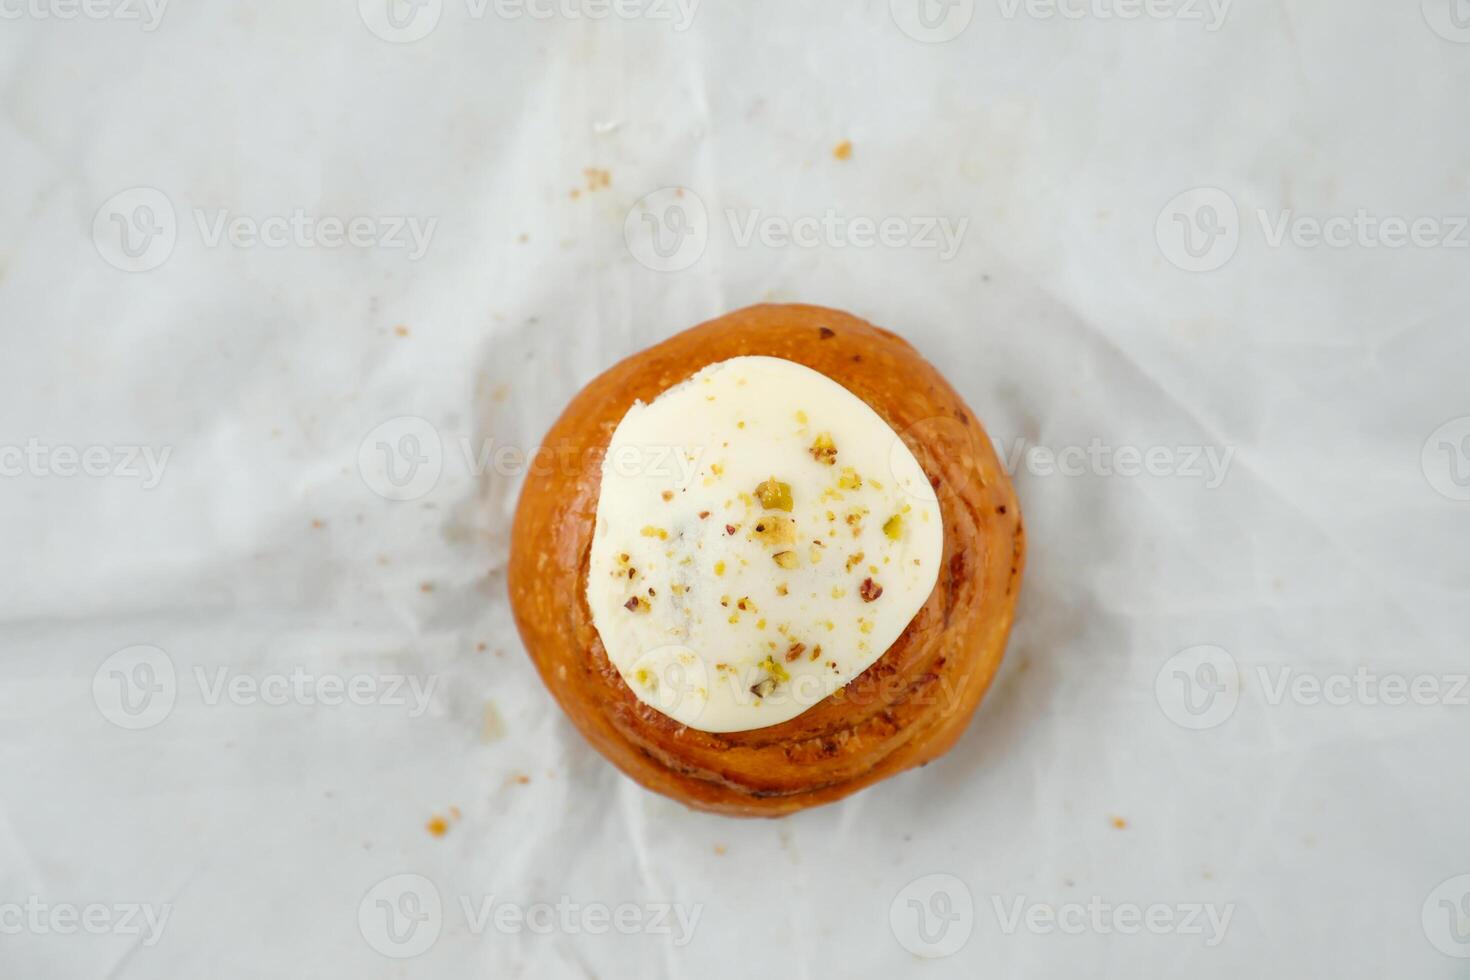 Cinnamon Roll isolated on grey background top view of french breakfast baked food item photo